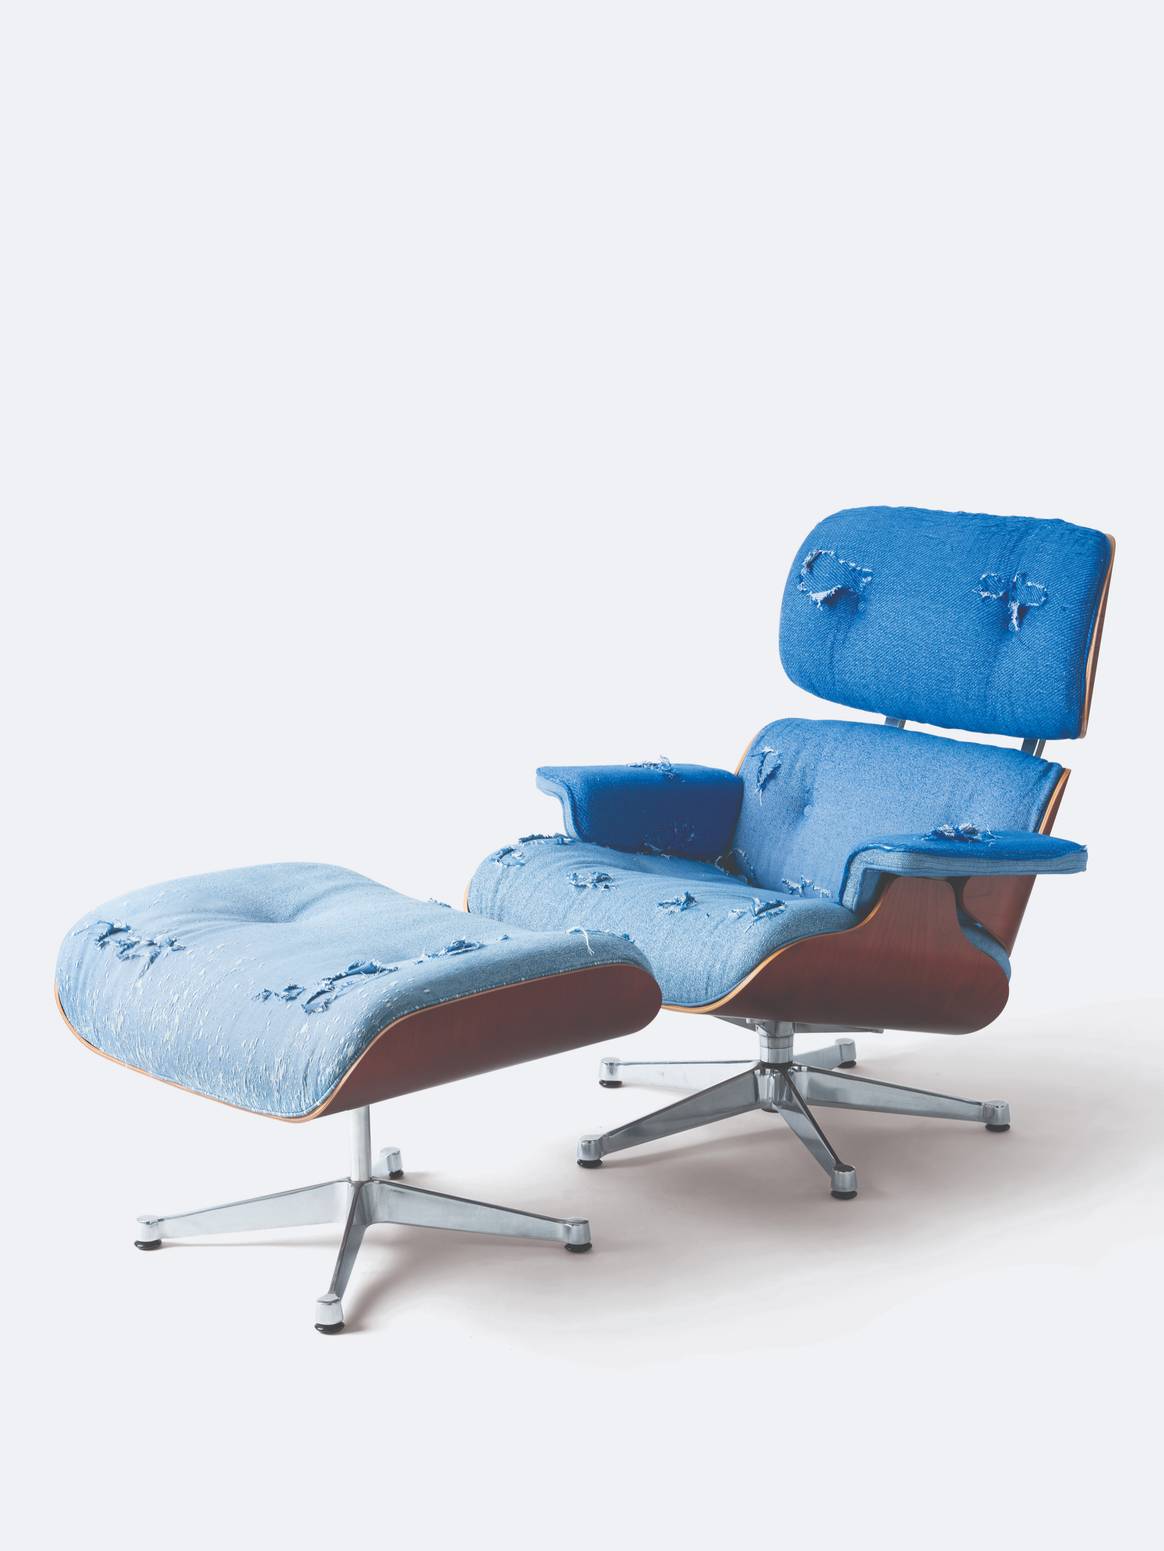 The Eames Lounge Chair Re/Outfitted by Kelly Konings – a concept of
The Visionary Lab, pre-used chair from Vitra, repurposed denim from
Levi’s®